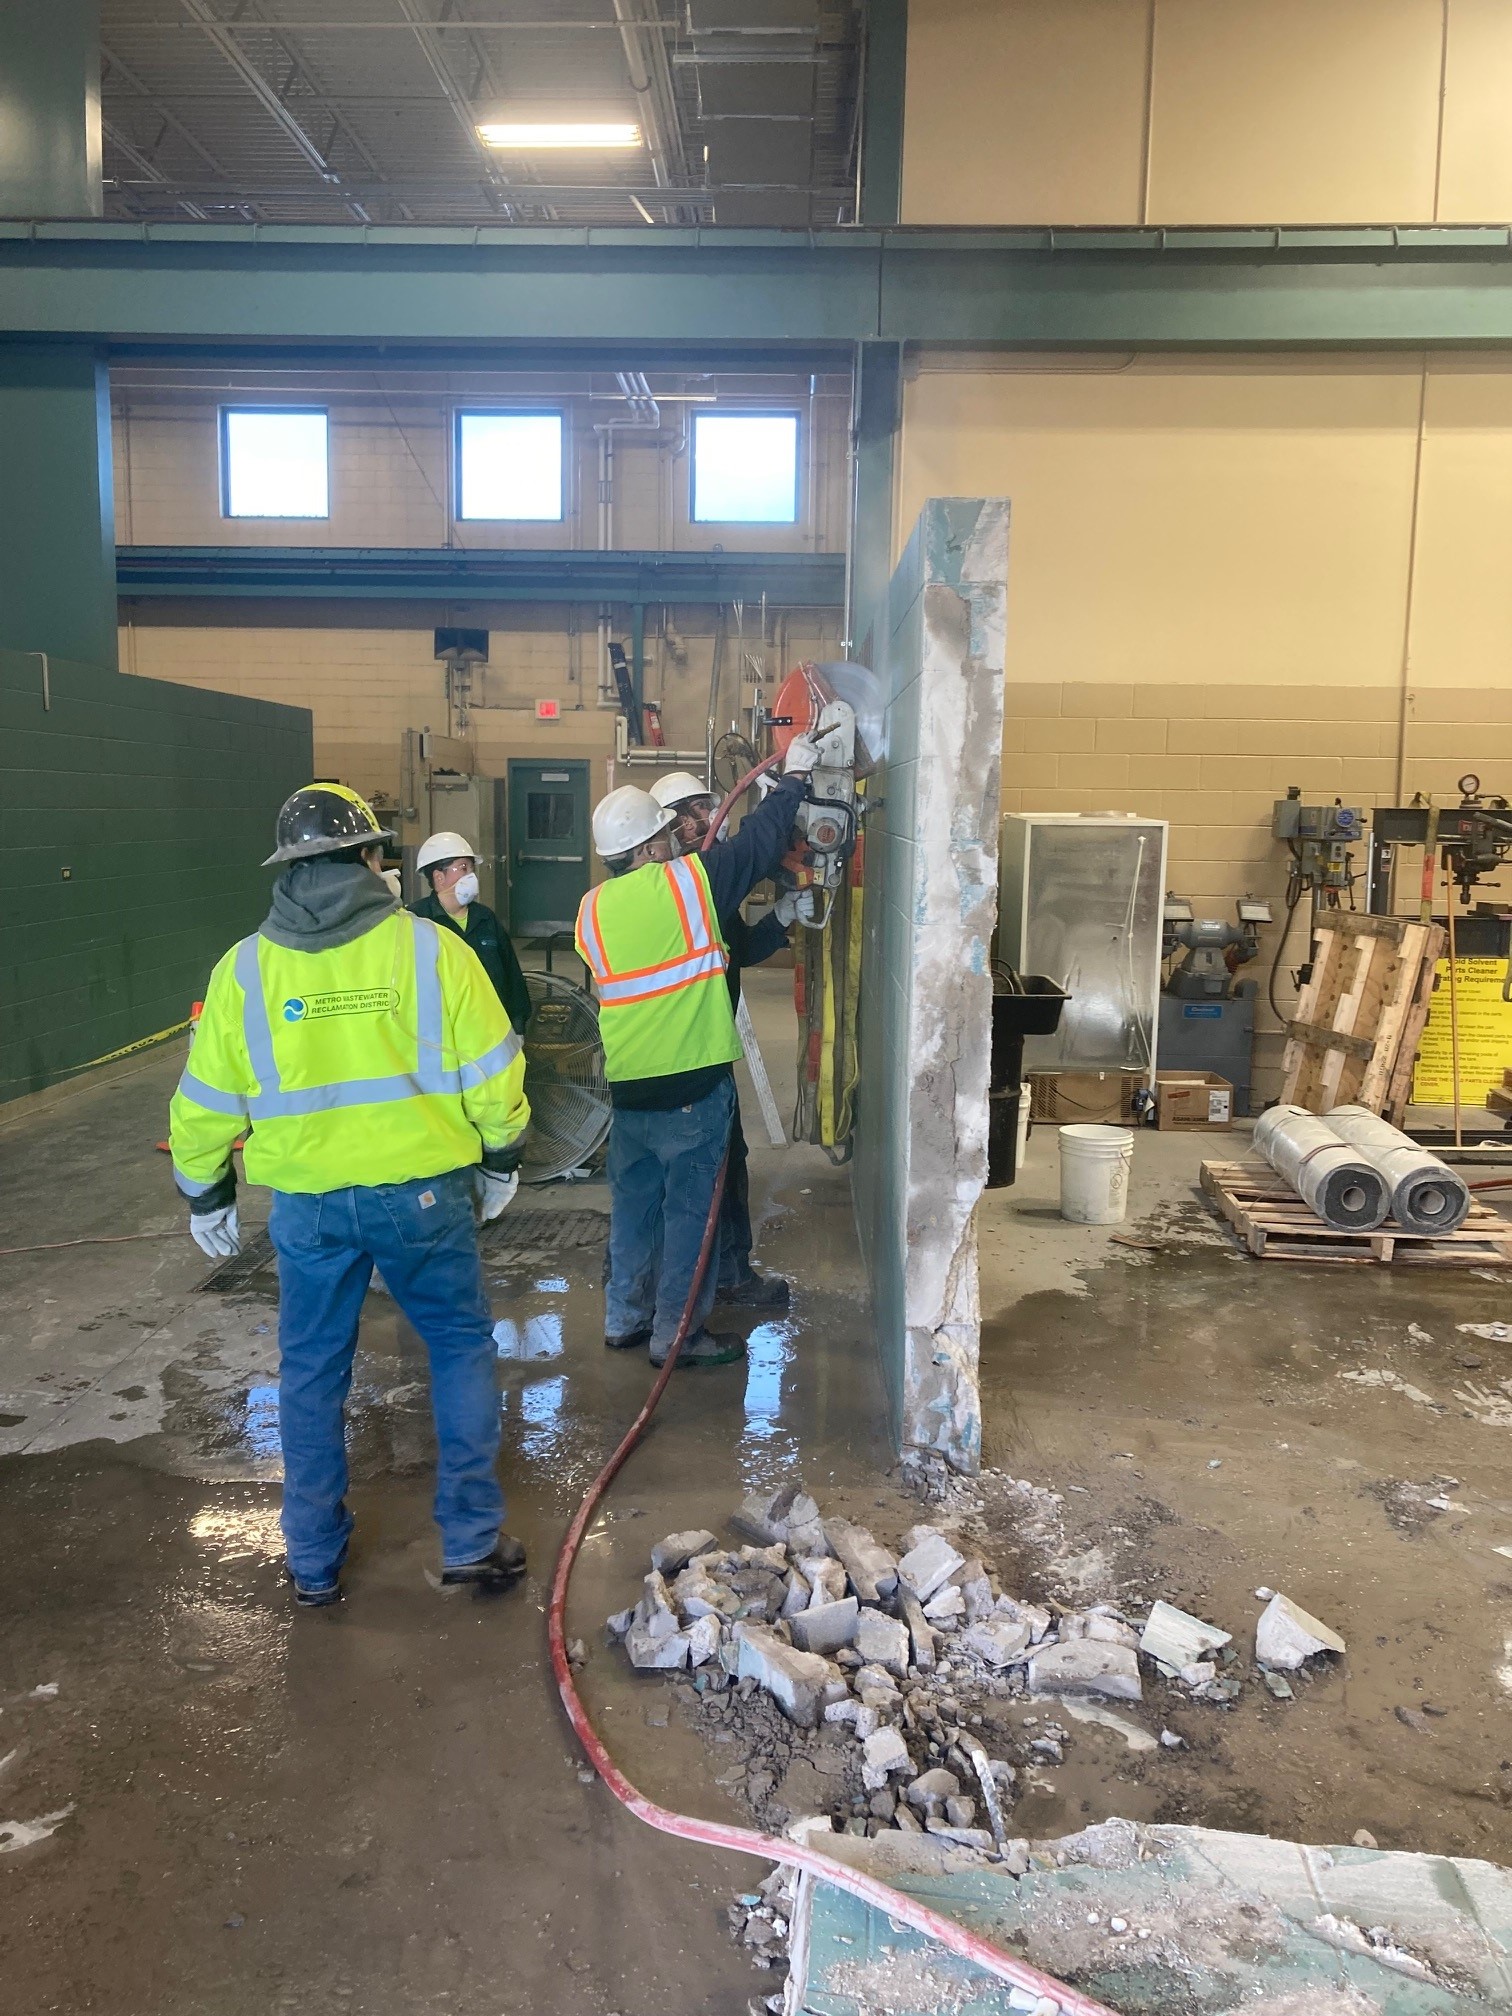 metro employees safely removing a brick wall while wearing personal protective equipment